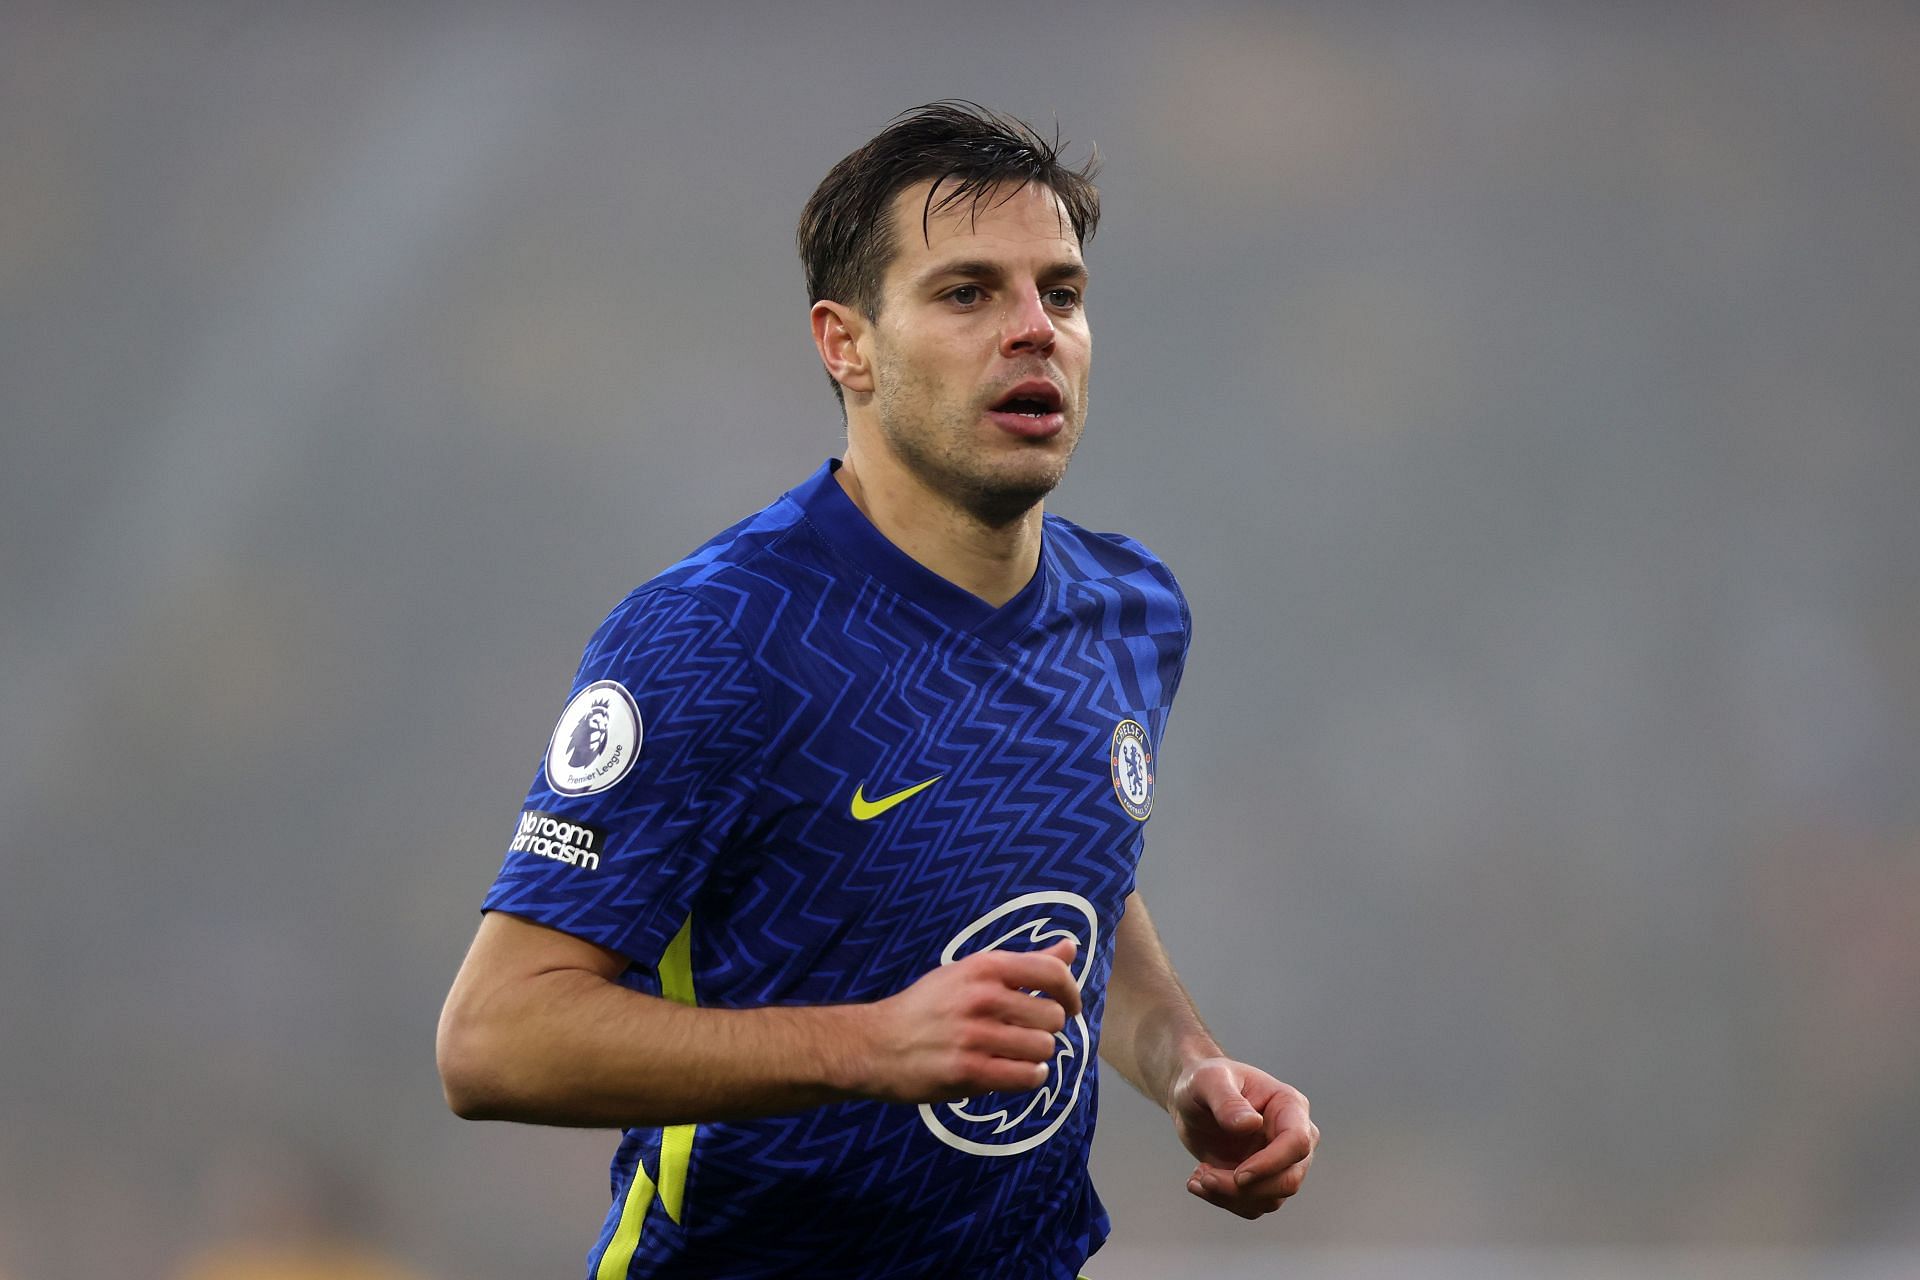 Barcelona are planning to move for Cesar Azpilicueta in January.